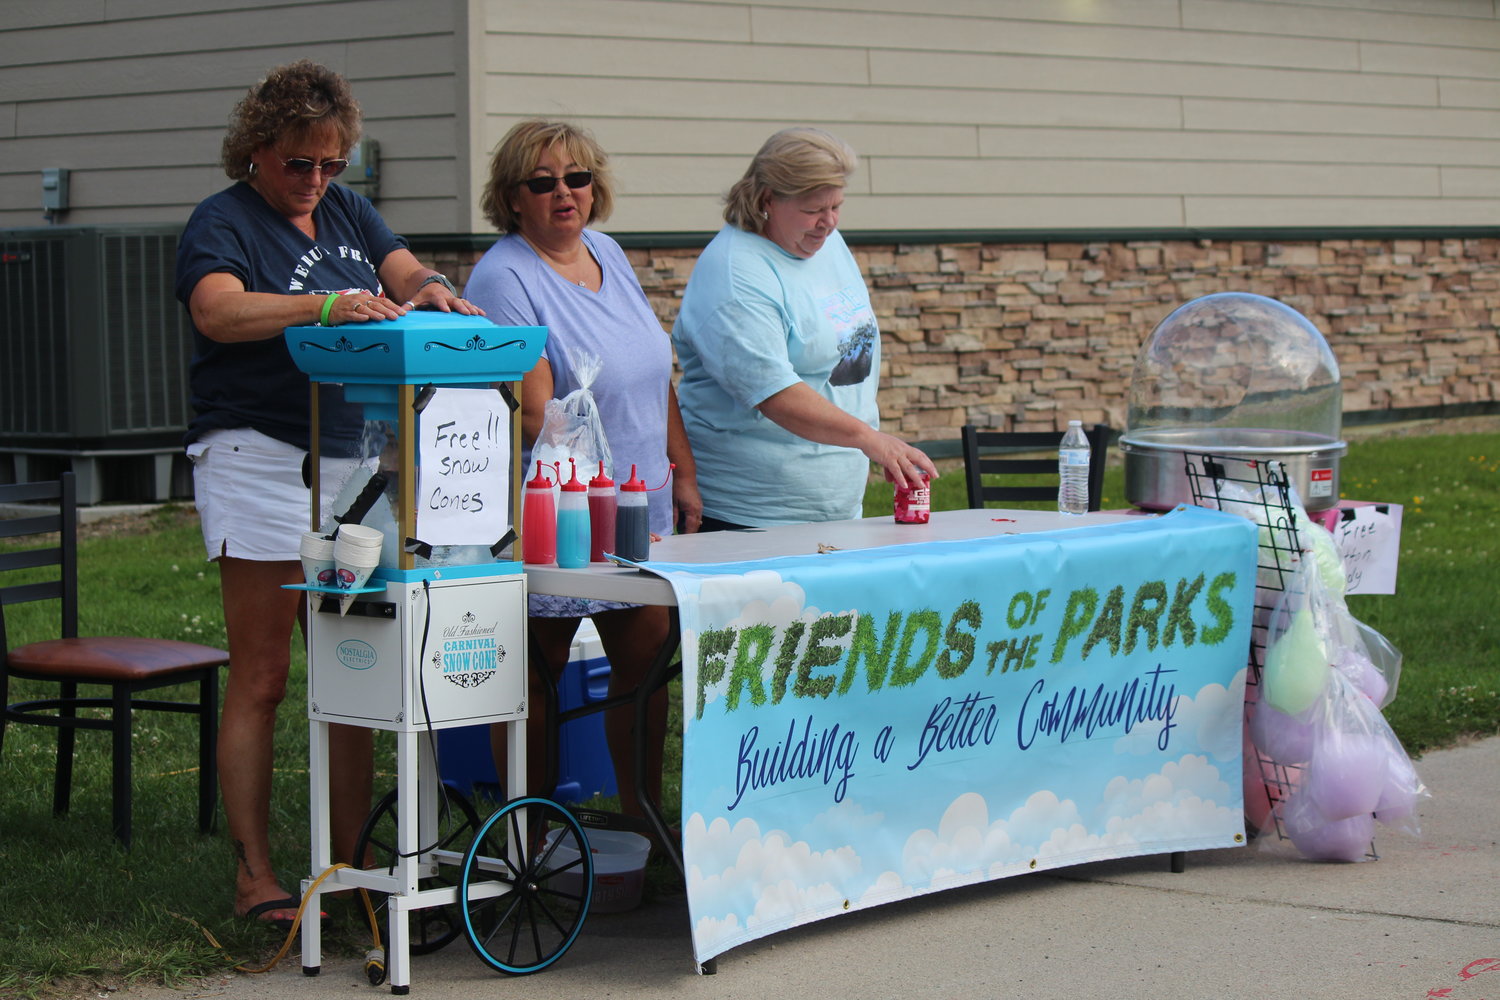 Diane Brunner, Sue Thomas and Carrolle Wood (left to right) offered guests free snow cones and cotton candy courtesy of Friends of the Parks.